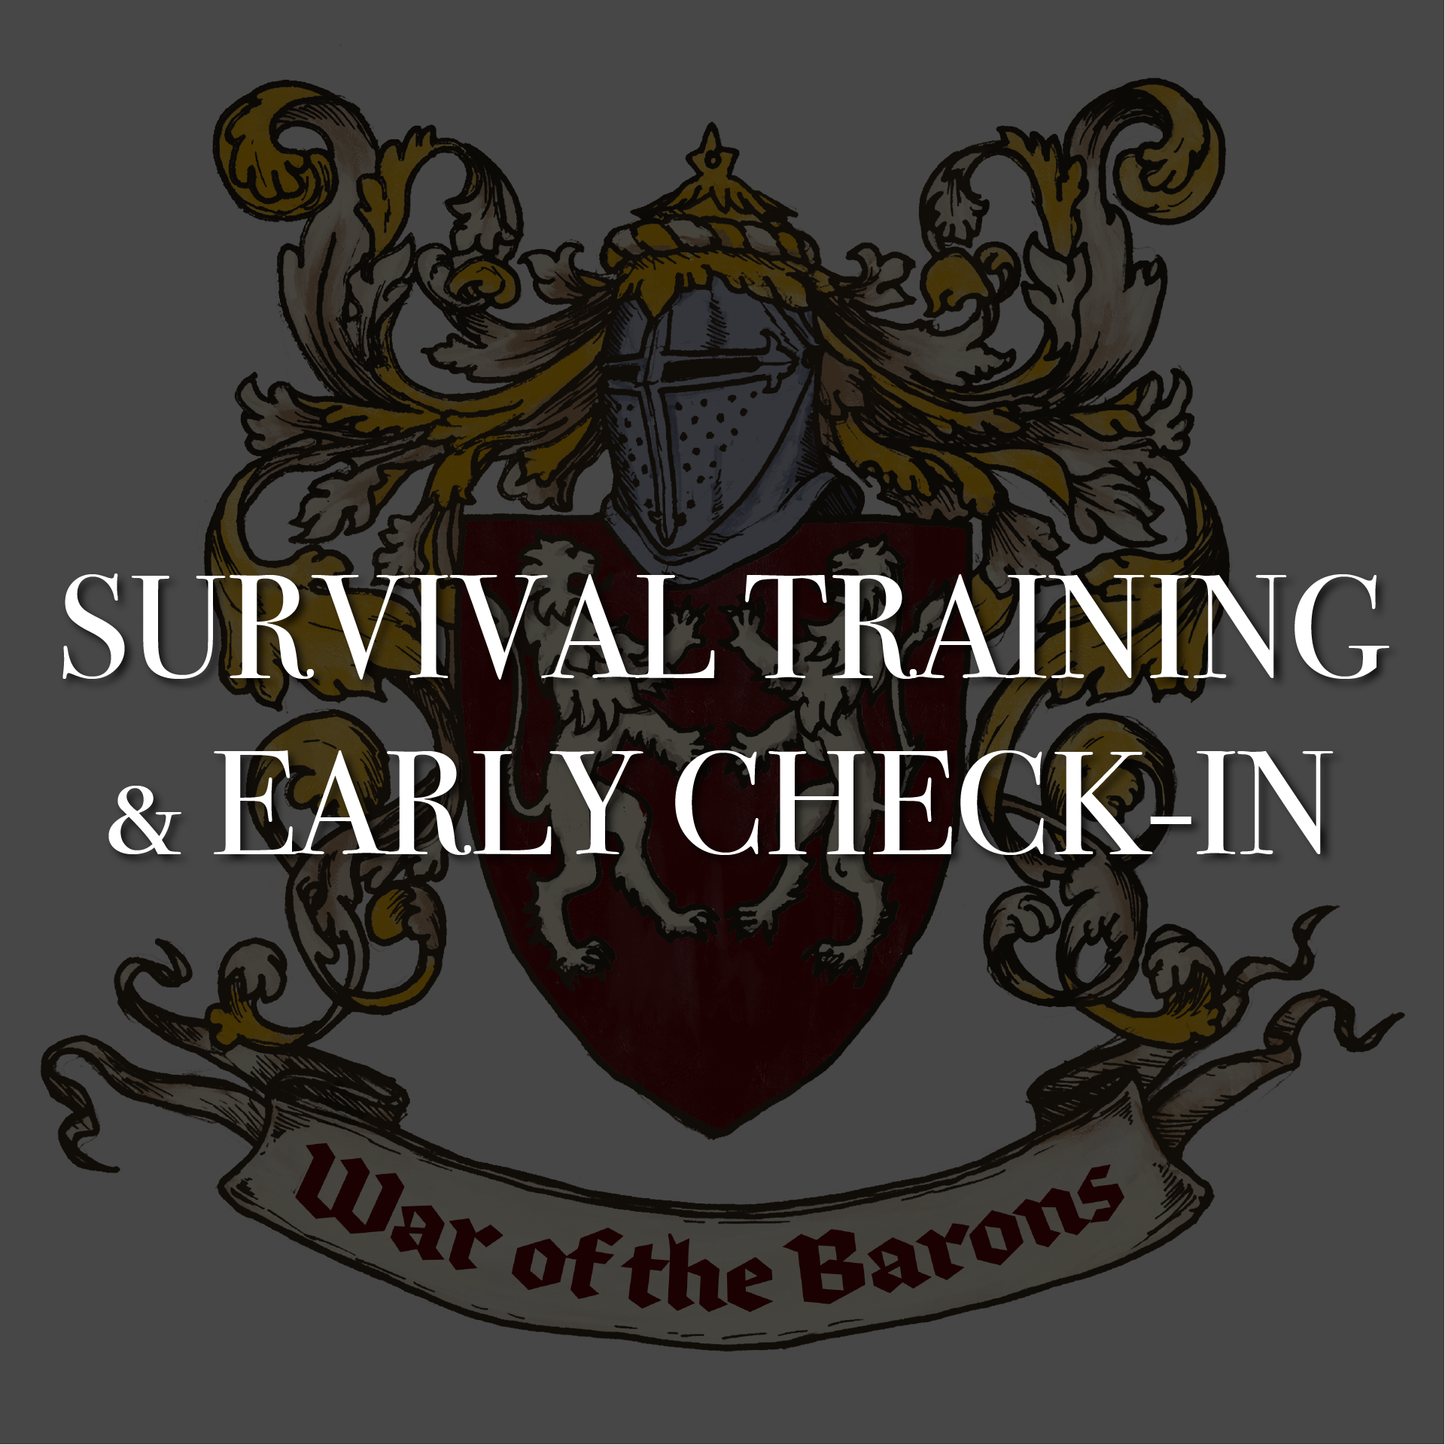 Early Check-In & Survival Training